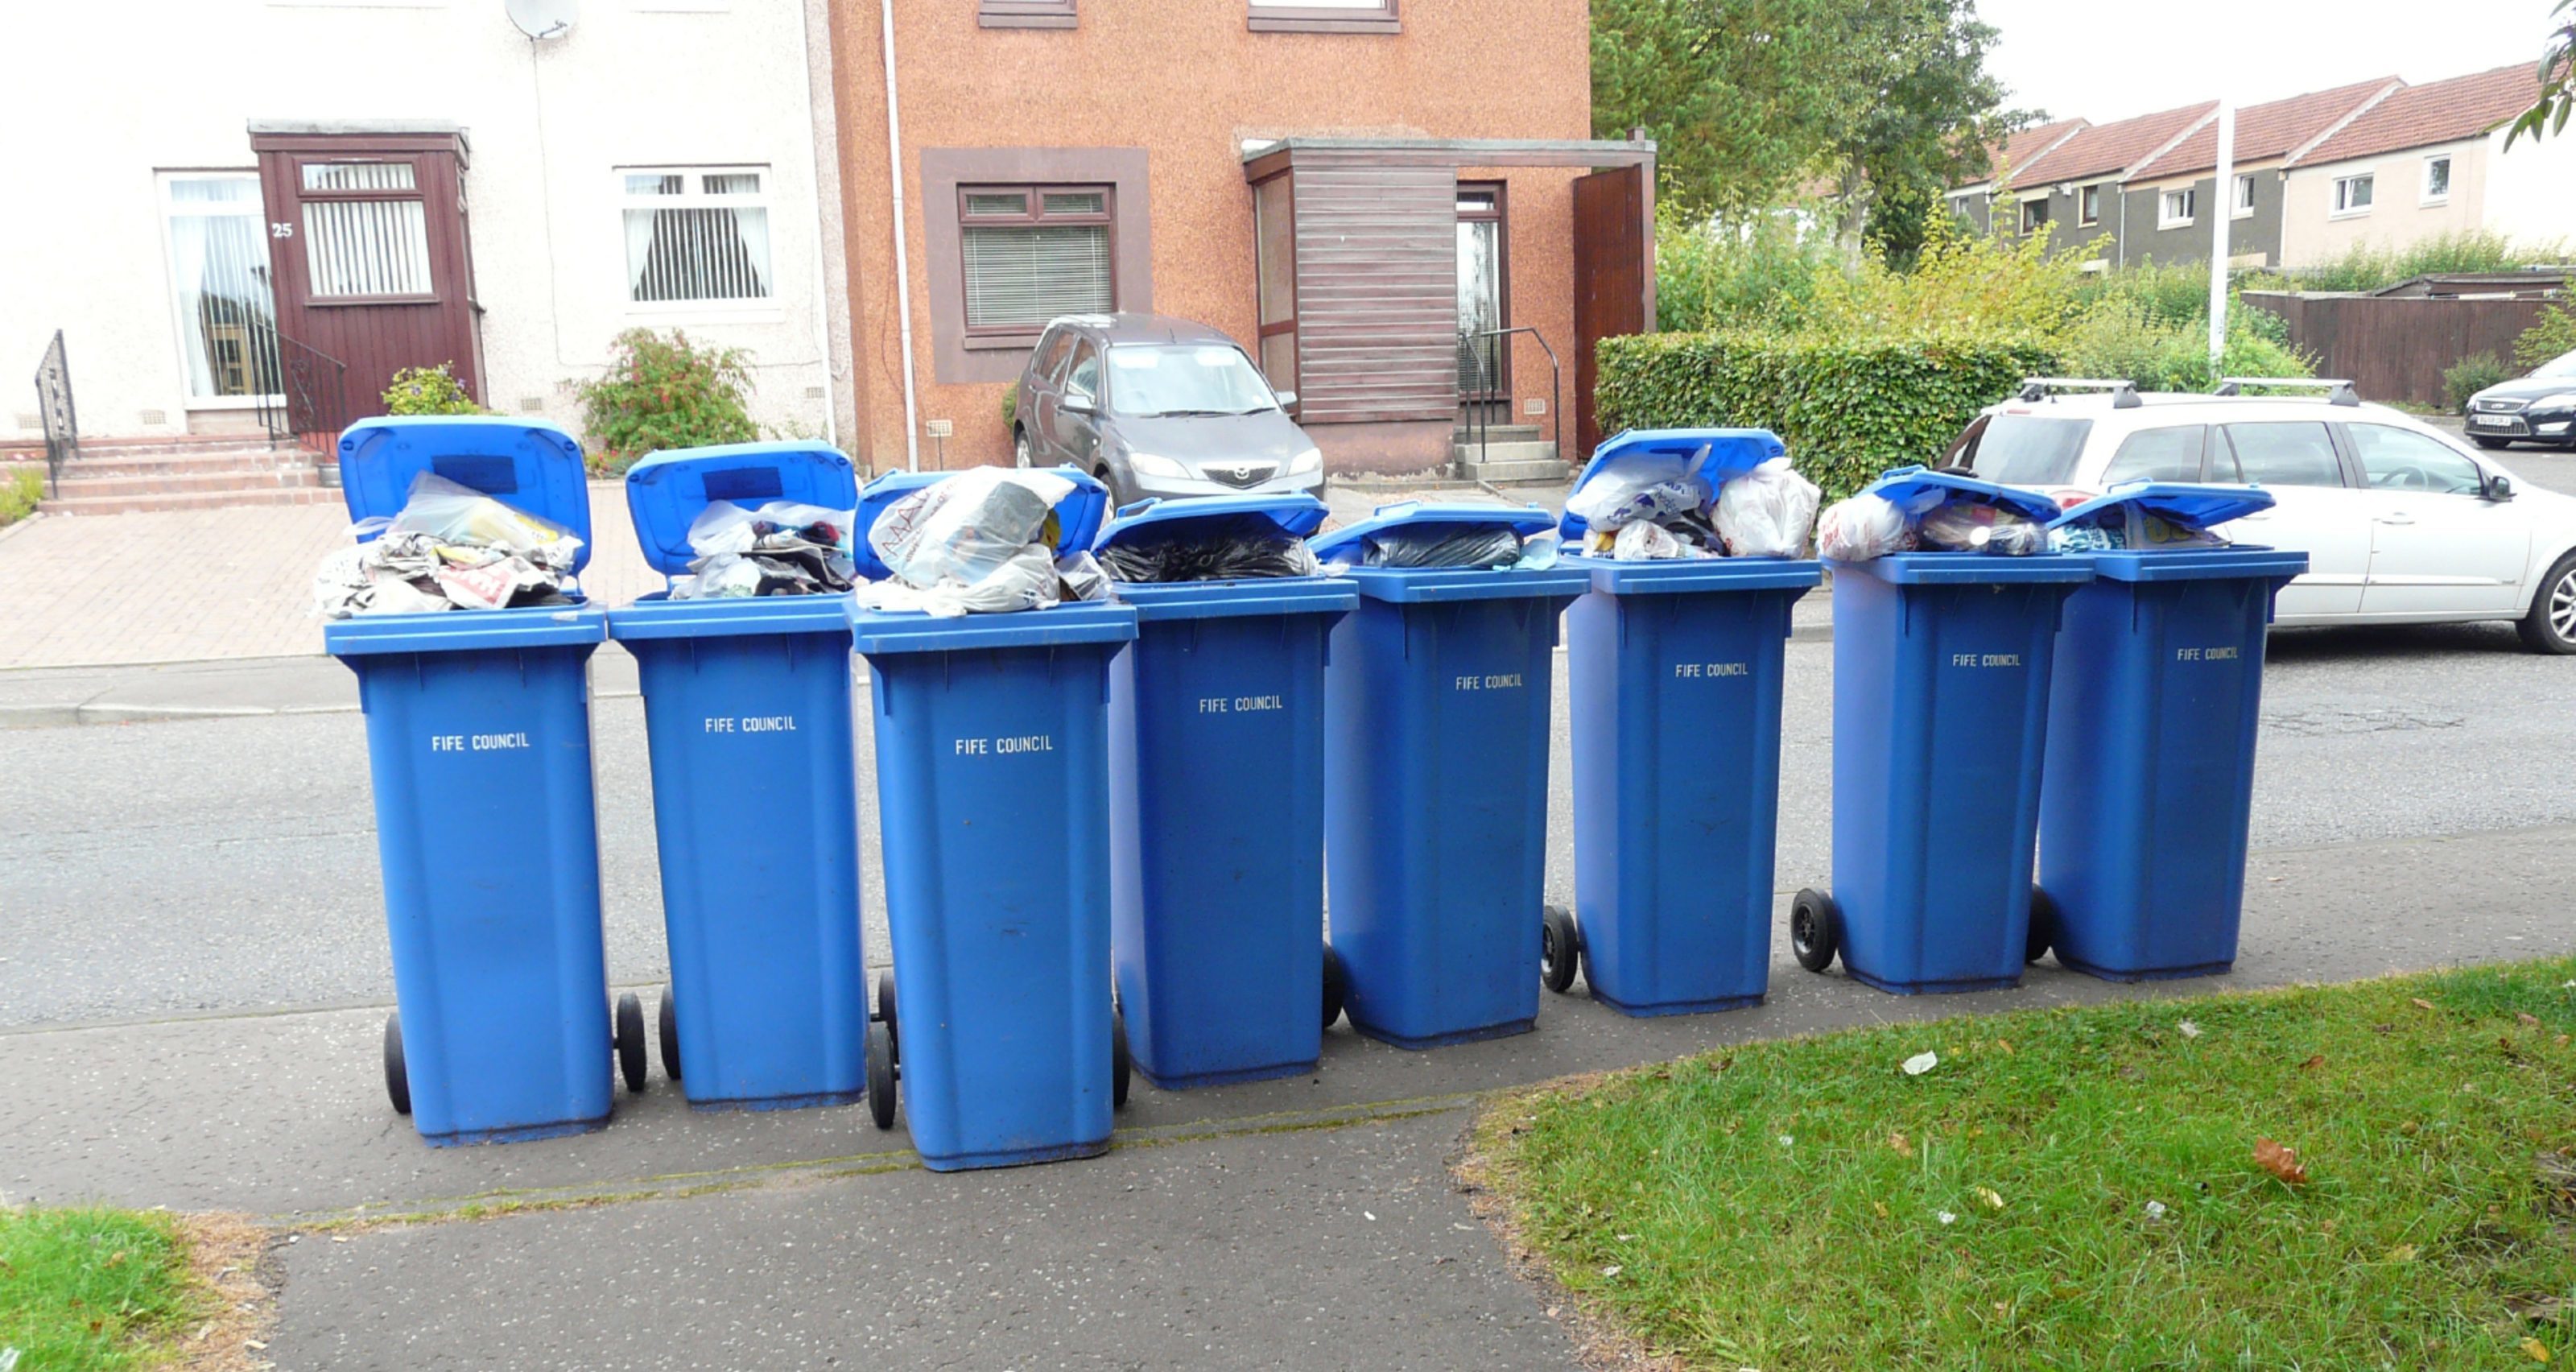 Claims were made that current landfill bins were too small for monthly collections